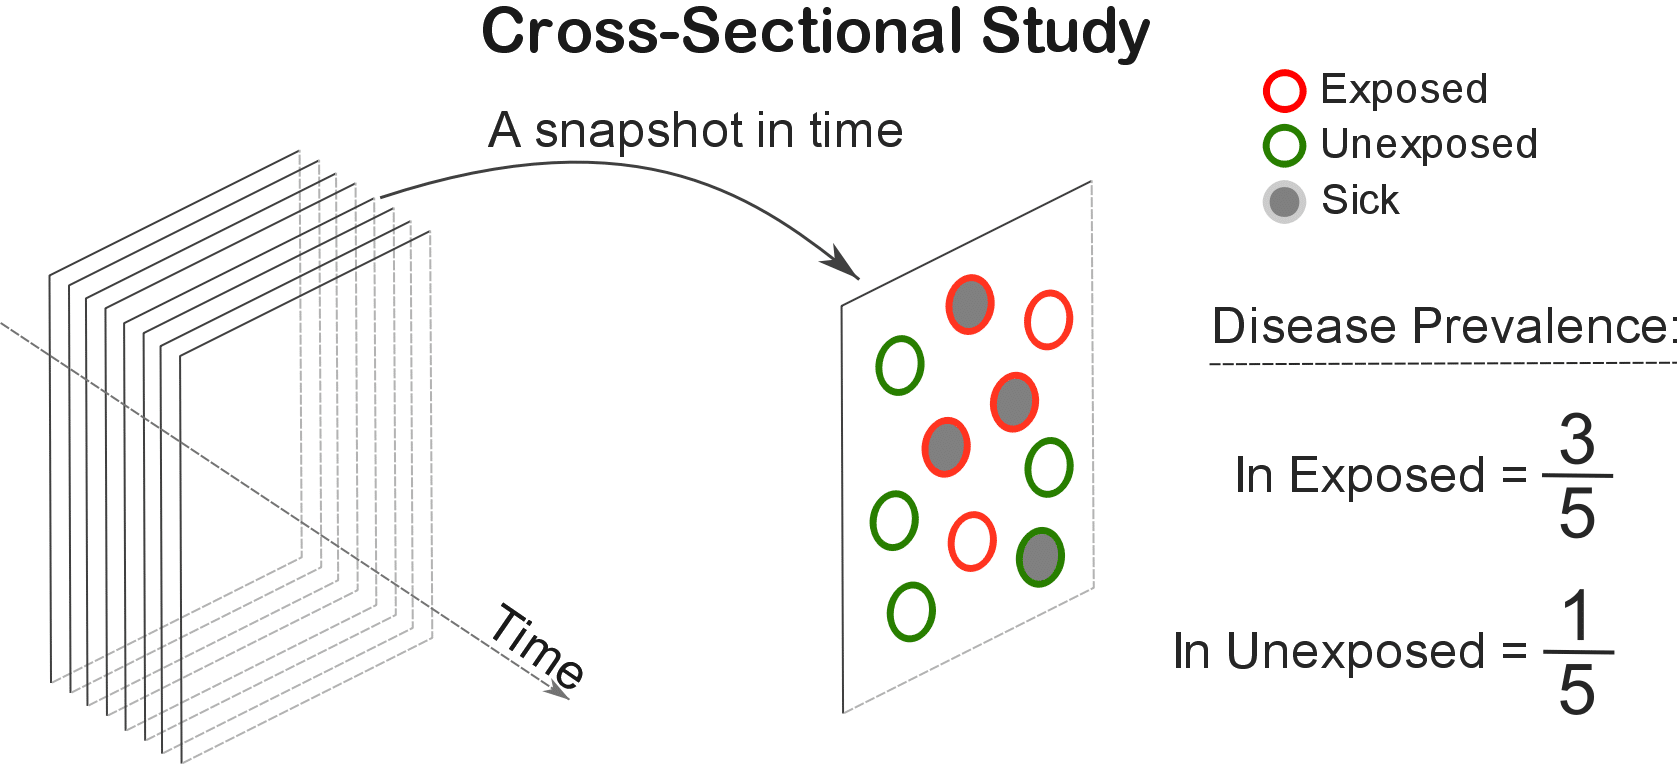 graphical representation of the cross-sectional study design